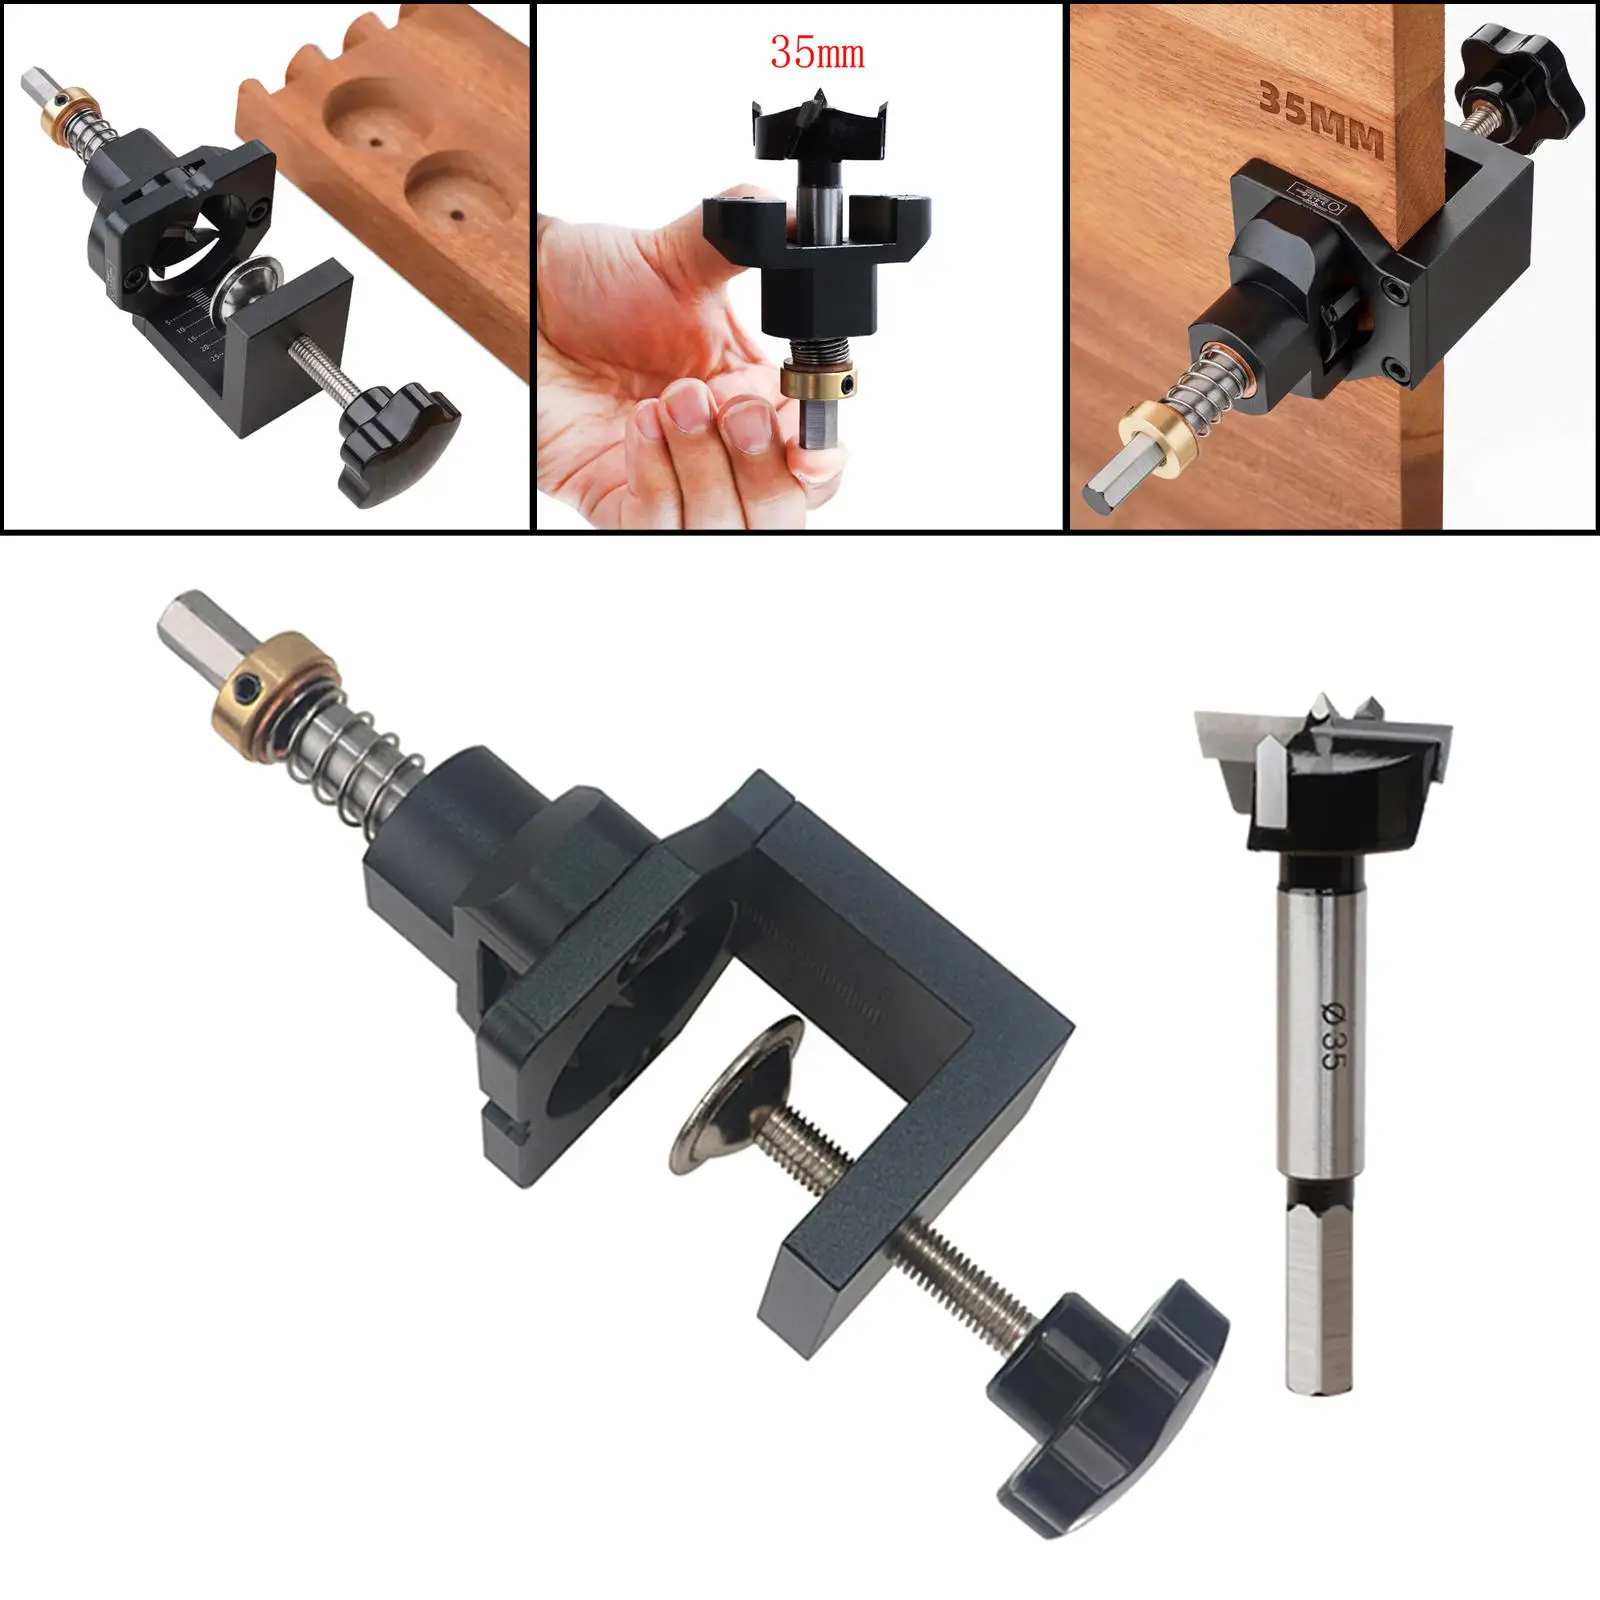 Hinge Puncher Tools Kit Clamp 35mm Hole Drill Jig Pocket Guide for Cabinet Cupboard